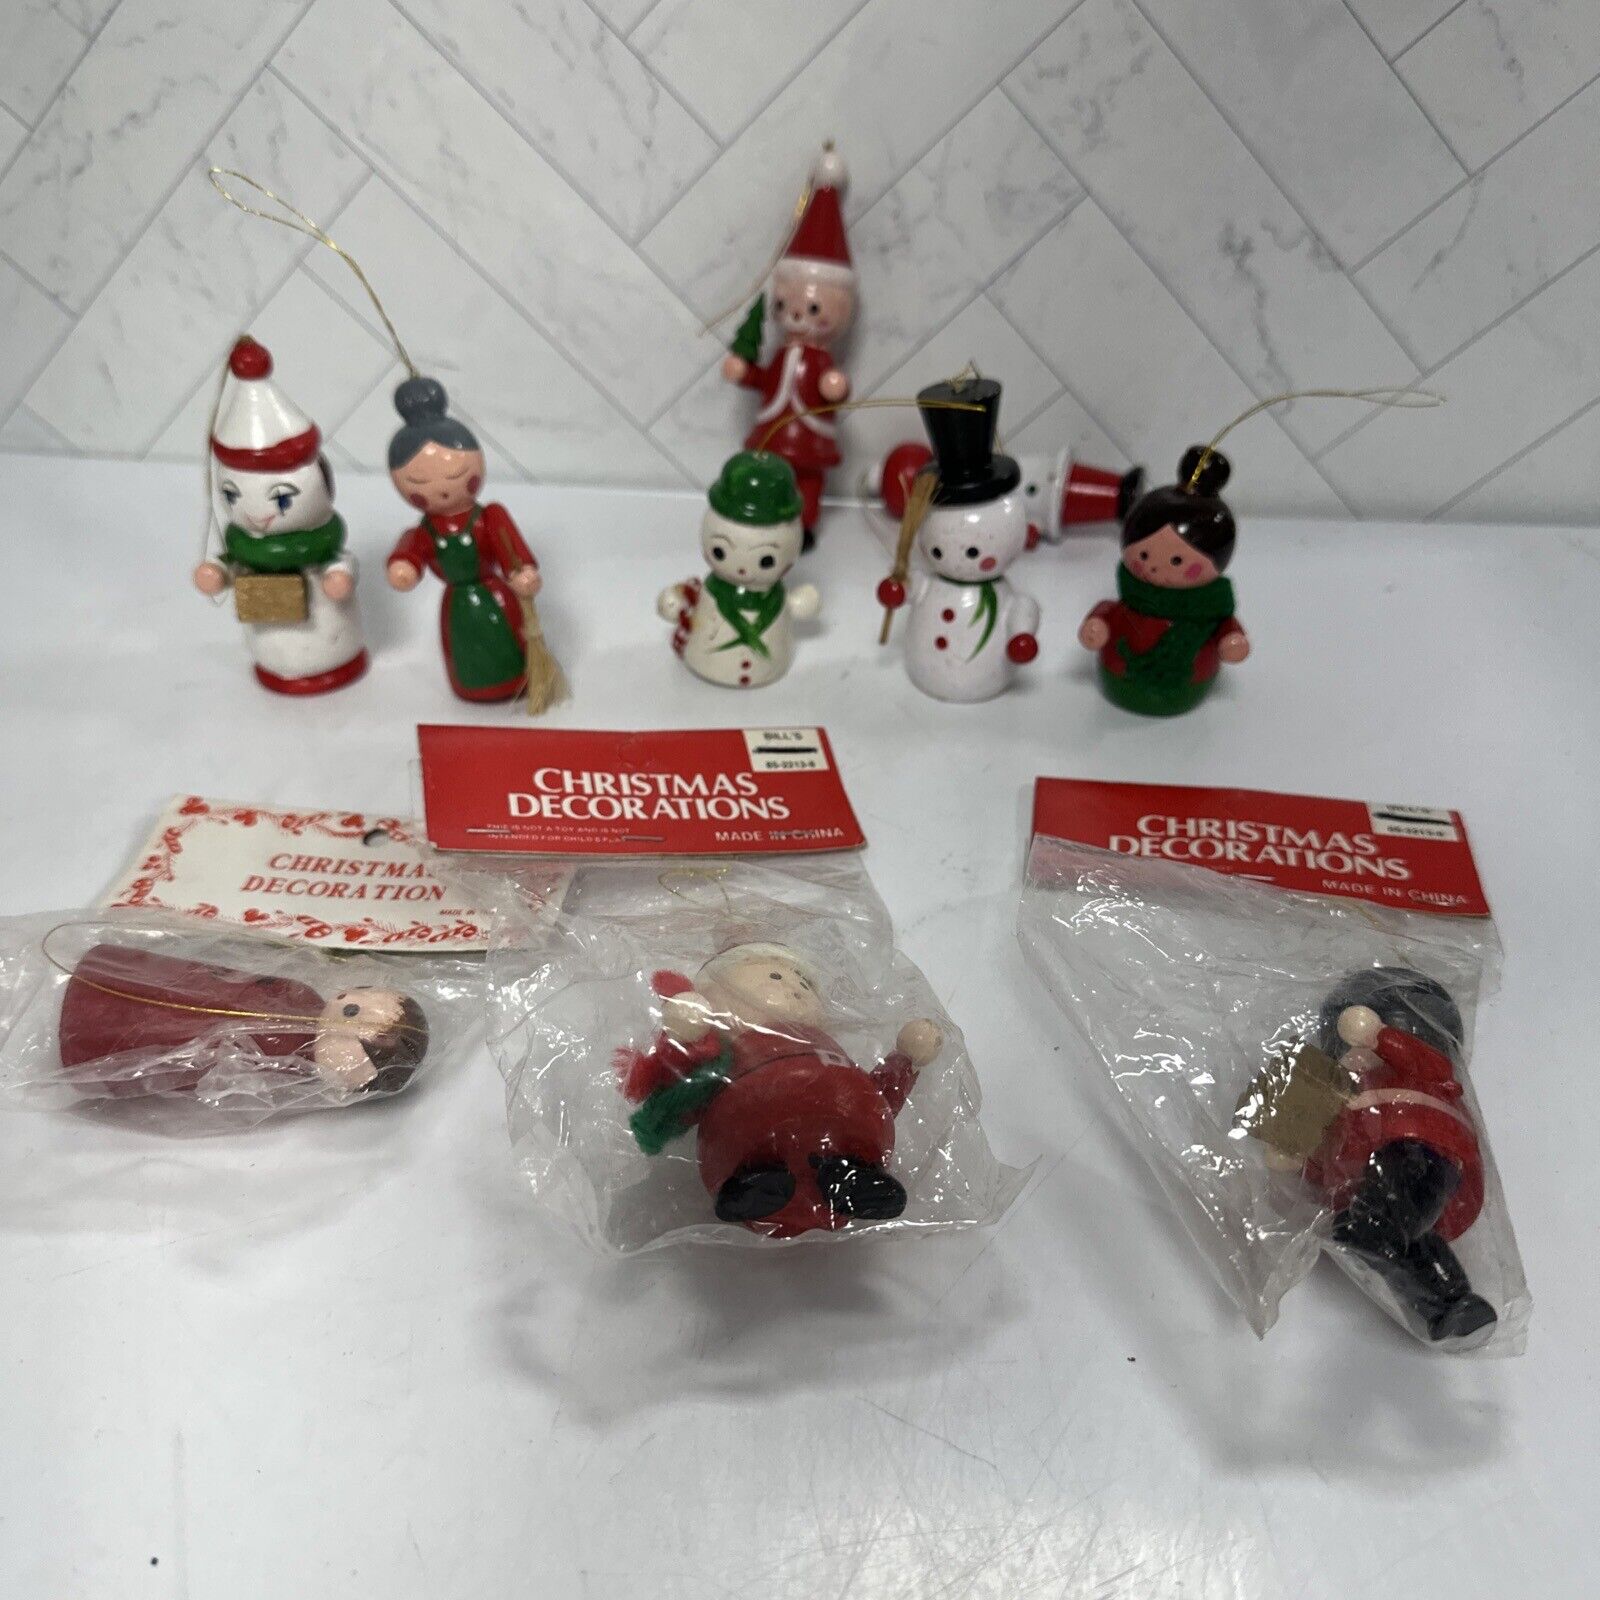 Vintage Wooden Peg Christmas Ornaments Set Of 10 - Some still new in bags